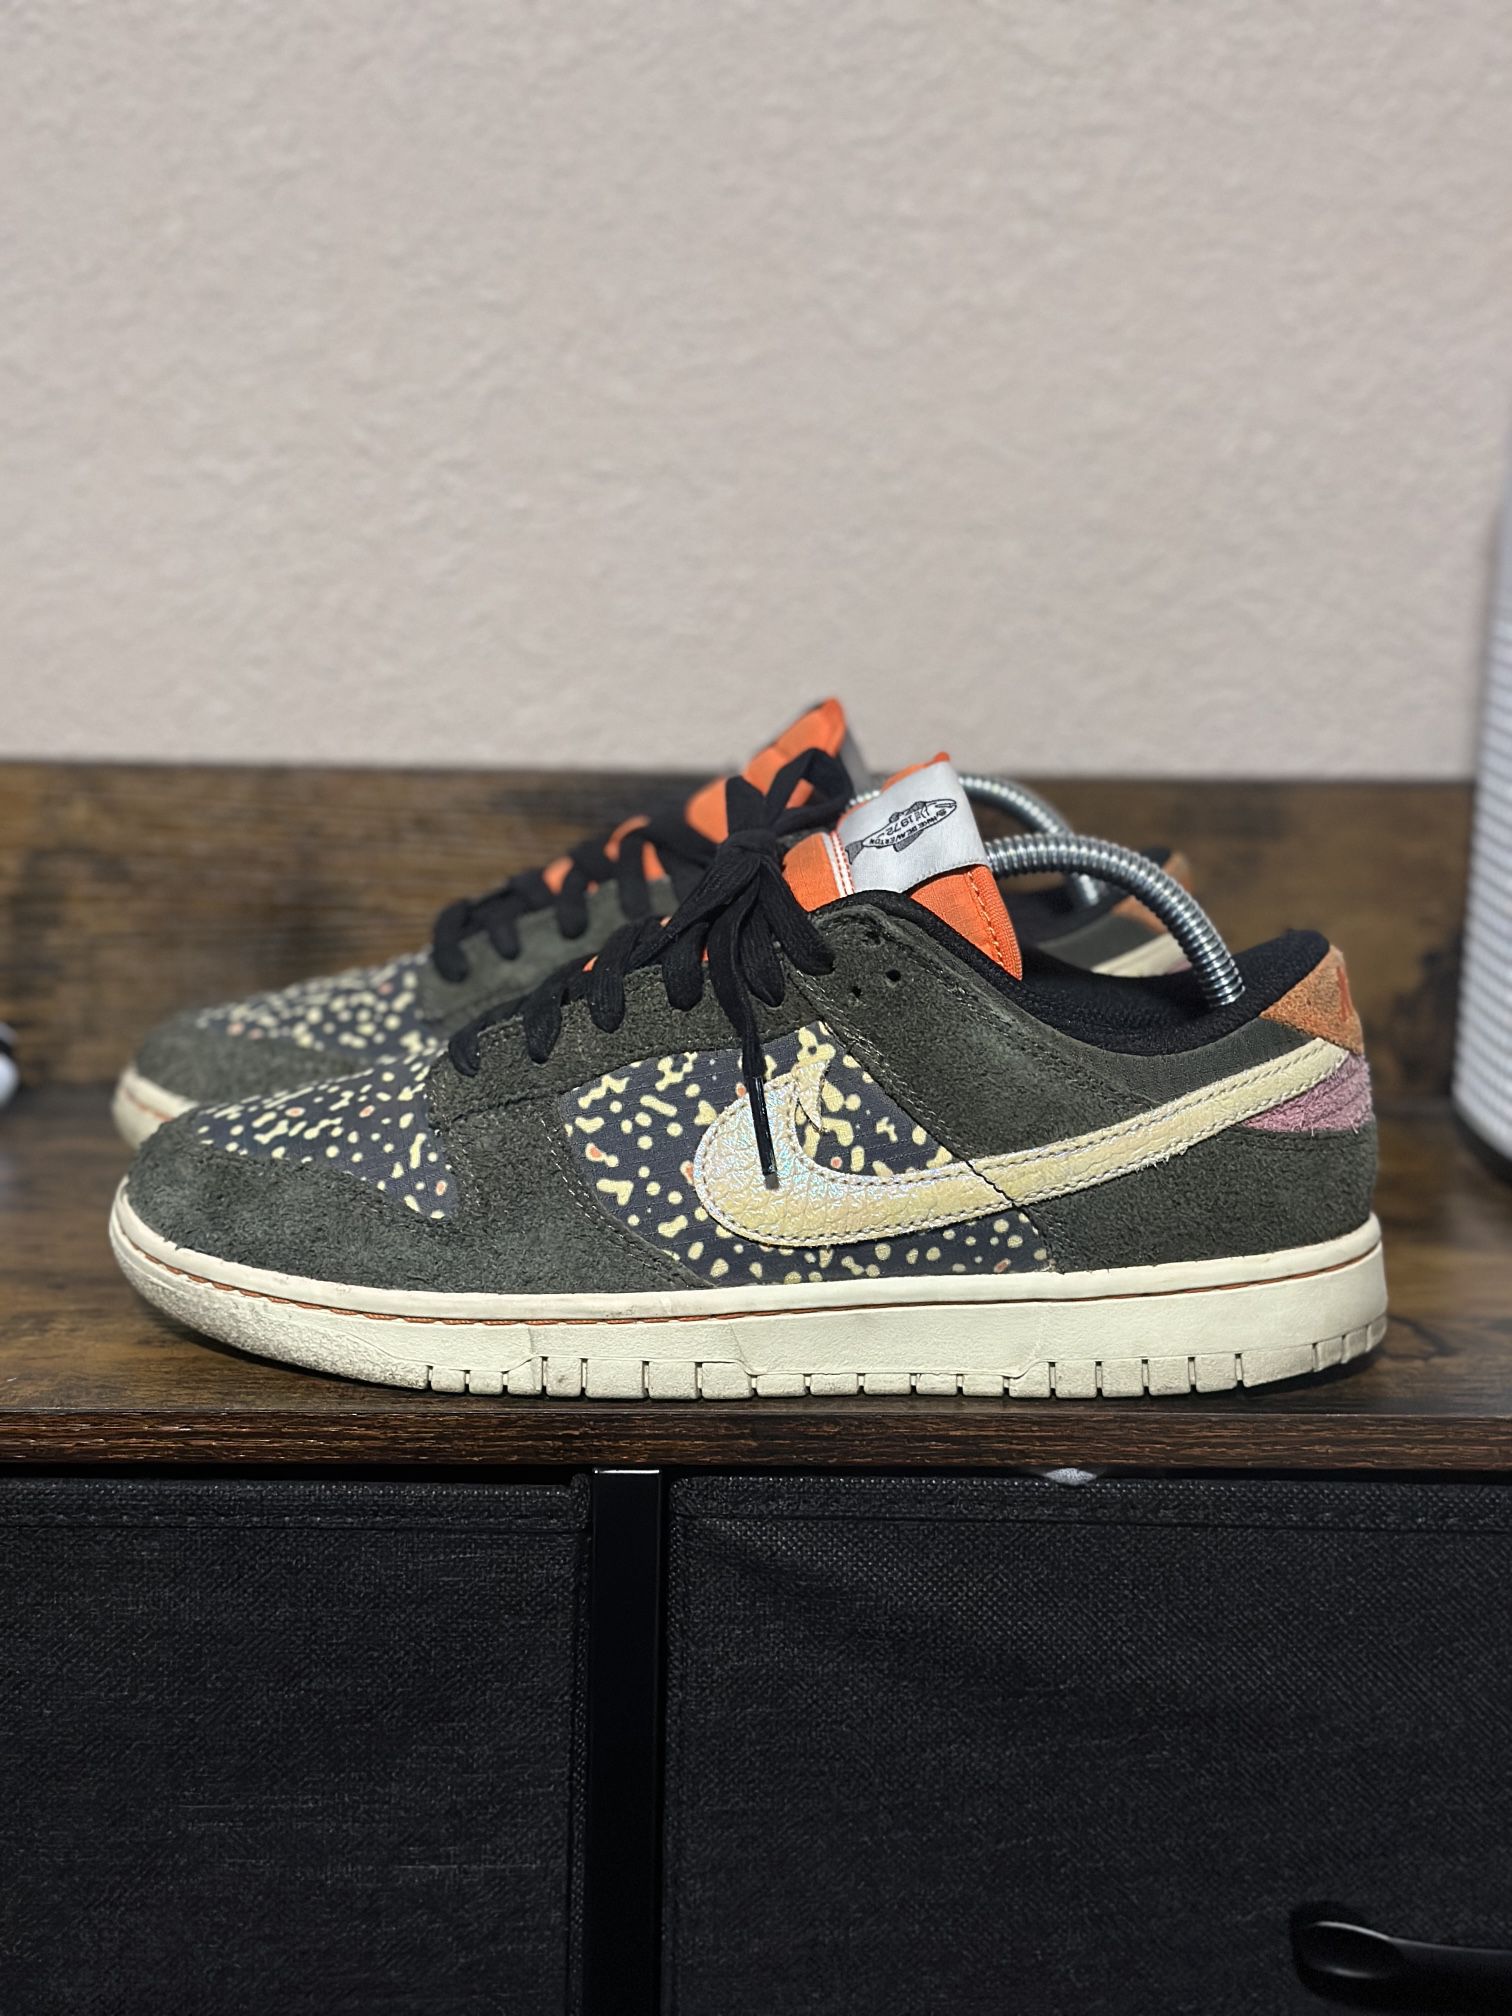 Size 8.5 Nike dunk low gone fishing rainbow trout 